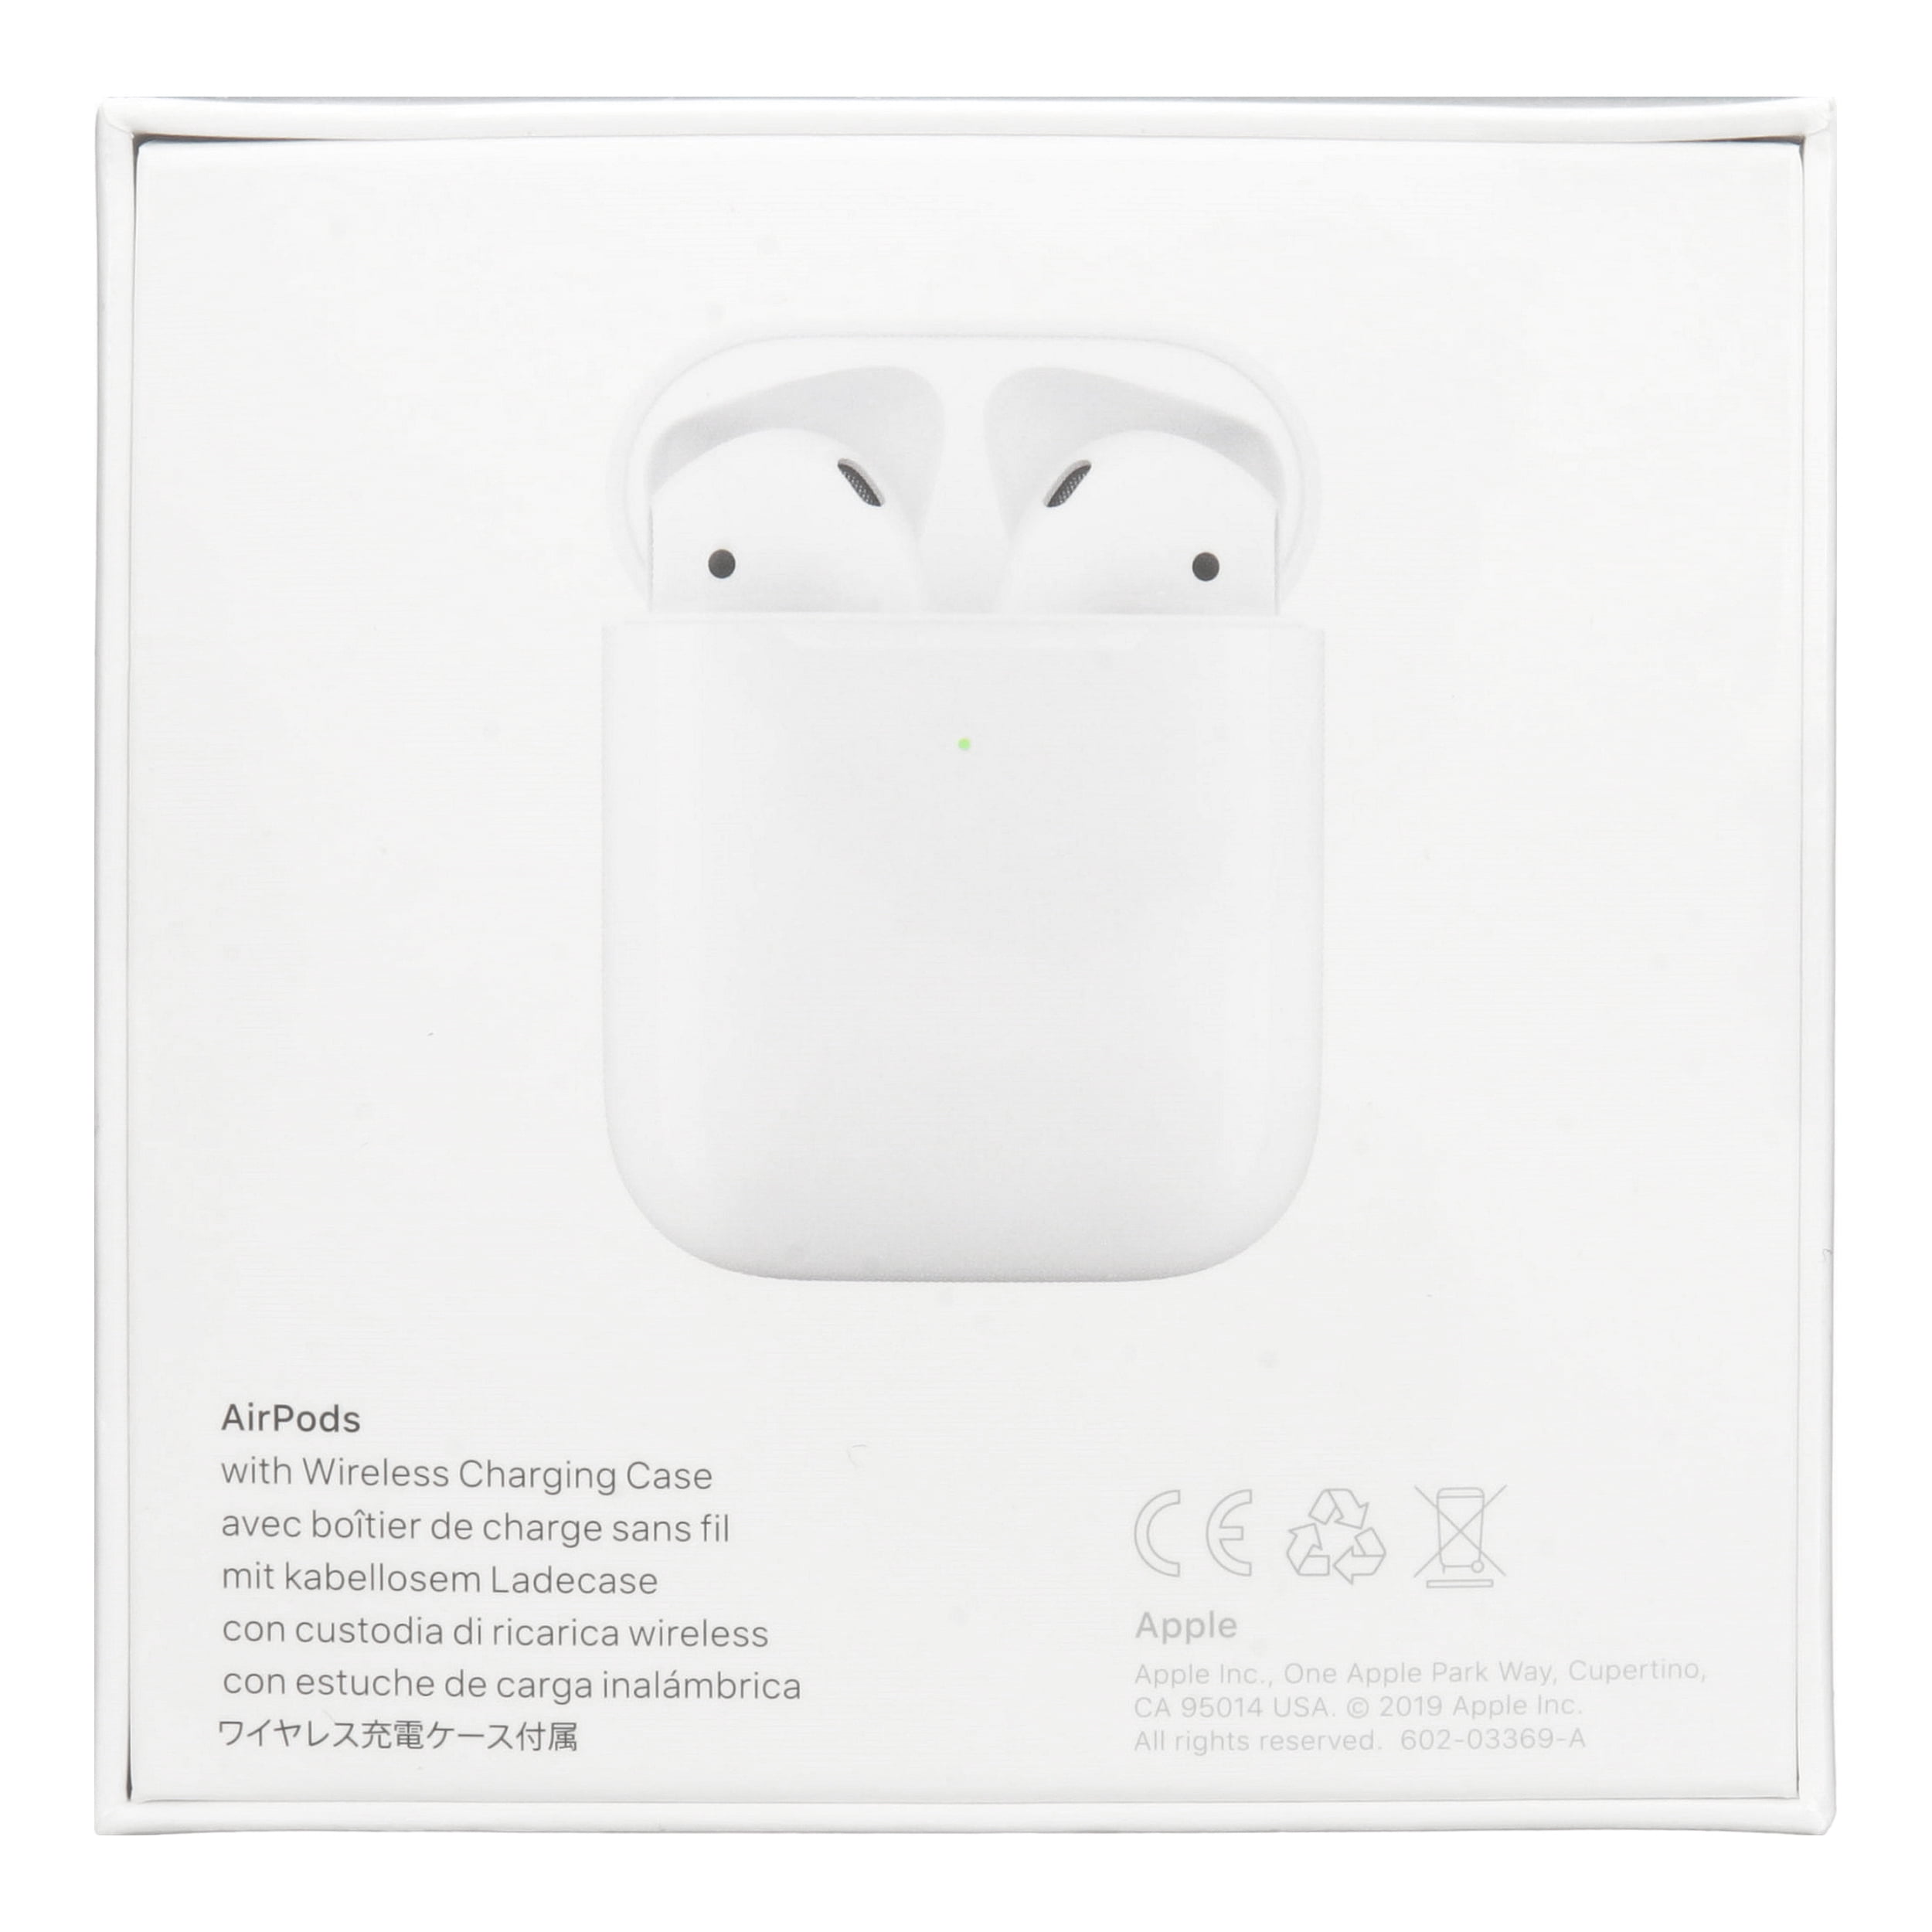 Apple AirPods with Wireless Charging Case - Walmart.com